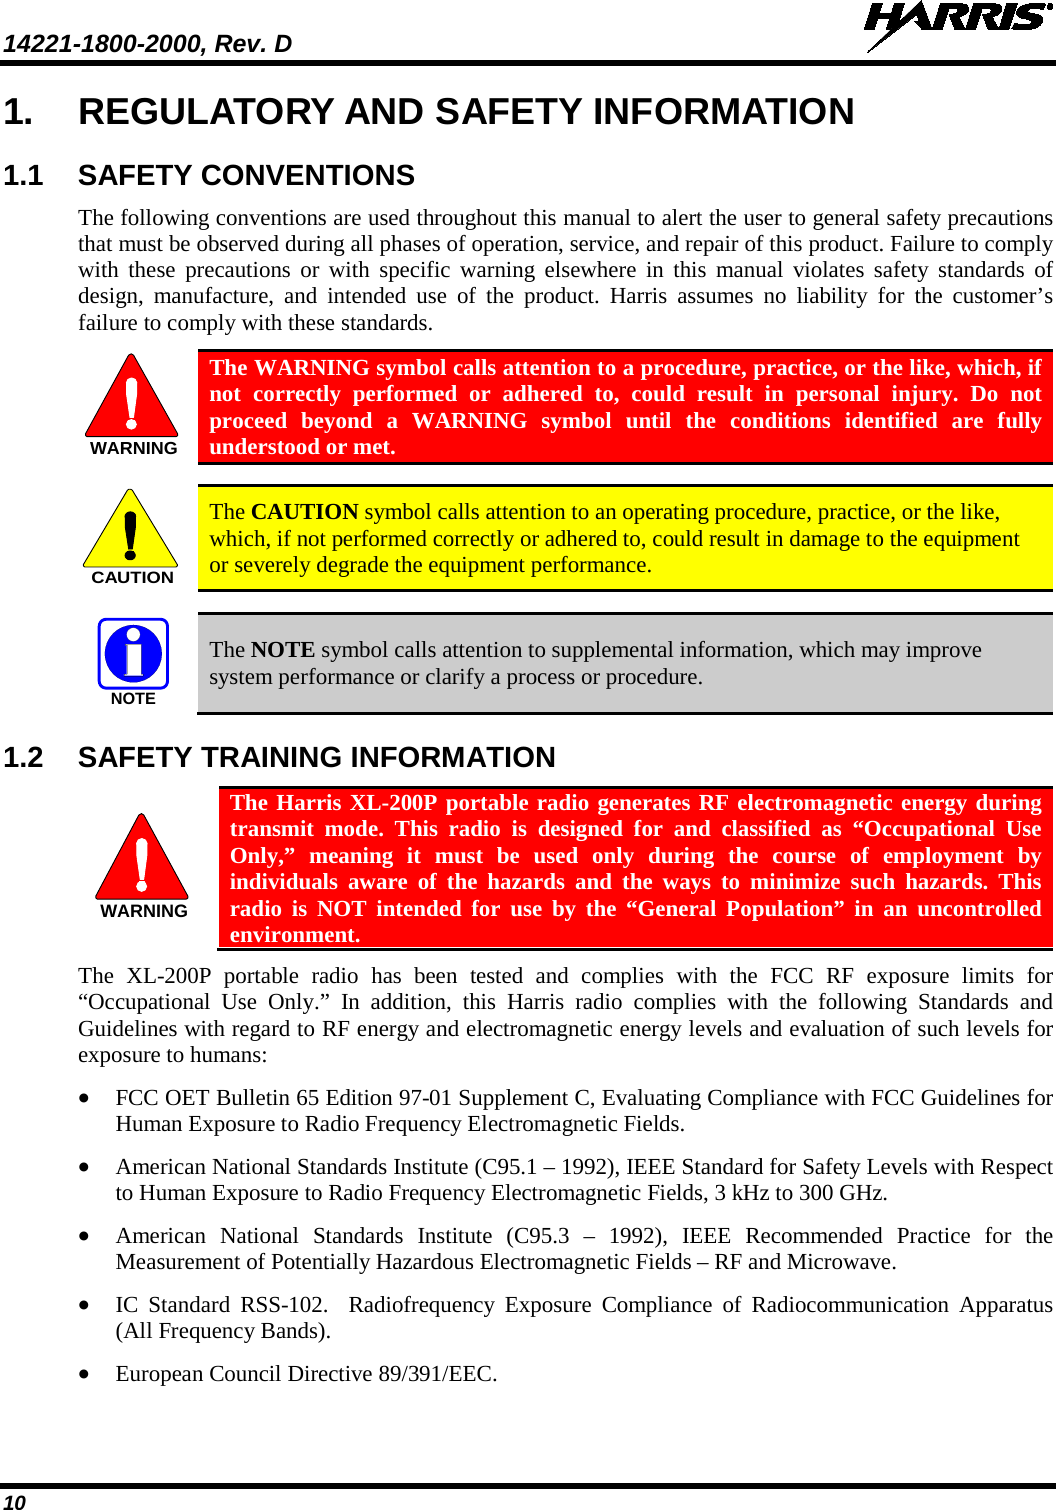 14221-1800-2000, Rev. D   10 1. REGULATORY AND SAFETY INFORMATION 1.1 SAFETY CONVENTIONS The following conventions are used throughout this manual to alert the user to general safety precautions that must be observed during all phases of operation, service, and repair of this product. Failure to comply with these precautions or with specific warning elsewhere in this manual violates safety standards of design, manufacture, and intended use of the product. Harris assumes no liability for the customer’s failure to comply with these standards.  The WARNING symbol calls attention to a procedure, practice, or the like, which, if not correctly performed or adhered to, could result in personal injury. Do not proceed beyond a WARNING symbol until the conditions identified are fully understood or met.    The CAUTION symbol calls attention to an operating procedure, practice, or the like, which, if not performed correctly or adhered to, could result in damage to the equipment or severely degrade the equipment performance.    The NOTE symbol calls attention to supplemental information, which may improve system performance or clarify a process or procedure. 1.2 SAFETY TRAINING INFORMATION  The Harris XL-200P portable radio generates RF electromagnetic energy during transmit mode. This radio is designed for and classified as “Occupational Use Only,” meaning it must be used only during the course of employment by individuals aware of the hazards and the ways to minimize such hazards. This radio is NOT intended for use by the “General Population” in an uncontrolled environment. The XL-200P portable radio has been tested and complies with the FCC RF exposure limits for “Occupational Use Only.”  In addition, this Harris radio complies with the following Standards and Guidelines with regard to RF energy and electromagnetic energy levels and evaluation of such levels for exposure to humans: • FCC OET Bulletin 65 Edition 97-01 Supplement C, Evaluating Compliance with FCC Guidelines for Human Exposure to Radio Frequency Electromagnetic Fields. • American National Standards Institute (C95.1 – 1992), IEEE Standard for Safety Levels with Respect to Human Exposure to Radio Frequency Electromagnetic Fields, 3 kHz to 300 GHz. • American National Standards Institute (C95.3 –  1992), IEEE Recommended Practice for the Measurement of Potentially Hazardous Electromagnetic Fields – RF and Microwave. • IC Standard RSS-102.  Radiofrequency Exposure Compliance of Radiocommunication Apparatus (All Frequency Bands). • European Council Directive 89/391/EEC. WARNINGCAUTIONNOTEWARNING